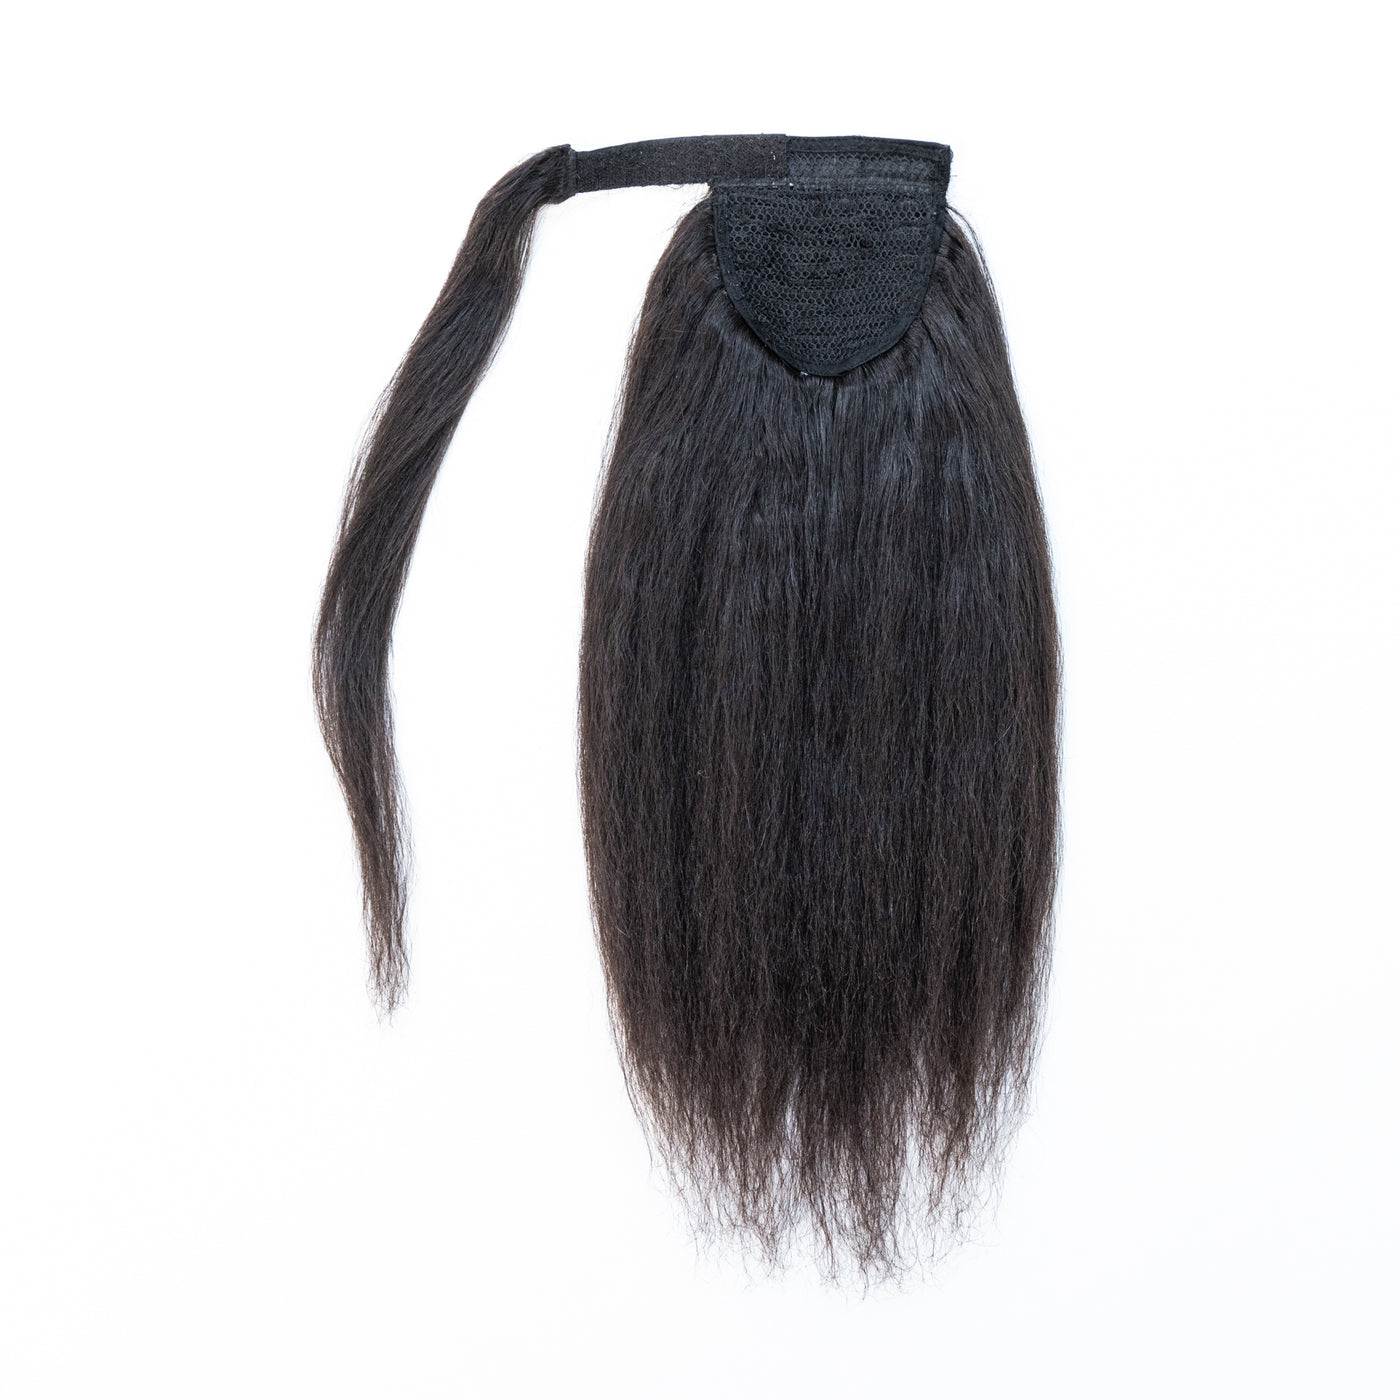 Ponytail Hair Extension - Kinky Straight